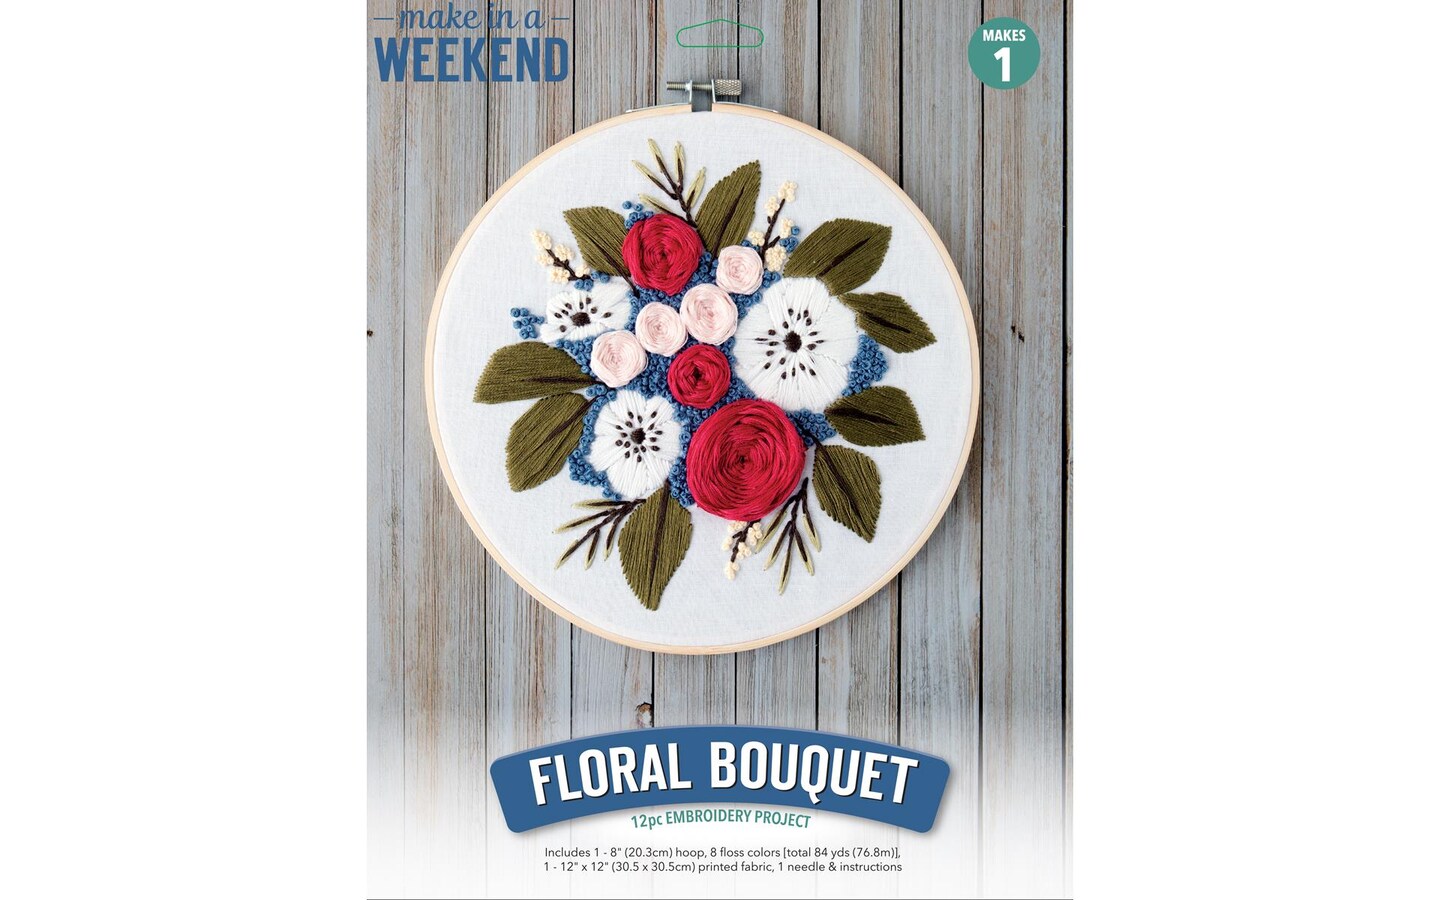 Leisure Arts Embroidery Kit 6 Floral Bouquet- embroidery kit for beginners  - embroidery kit for adults - cross stitch kits - cross stitch kits for  beginners - embroidery patterns